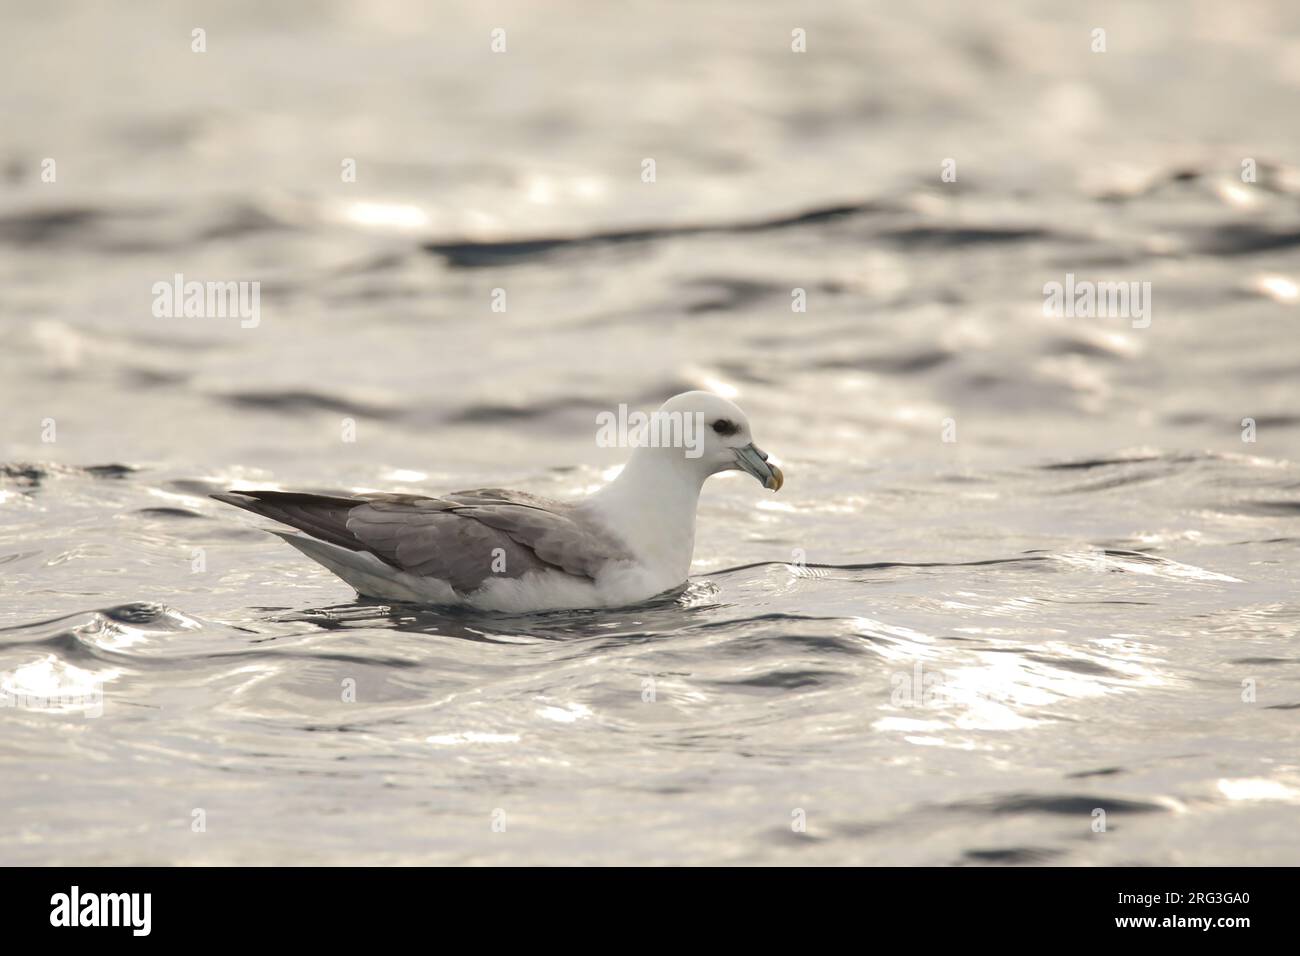 Northern fulmar (Fulmarus glacialis) sitting on the water, against the light, in Brittany, France. Stock Photo